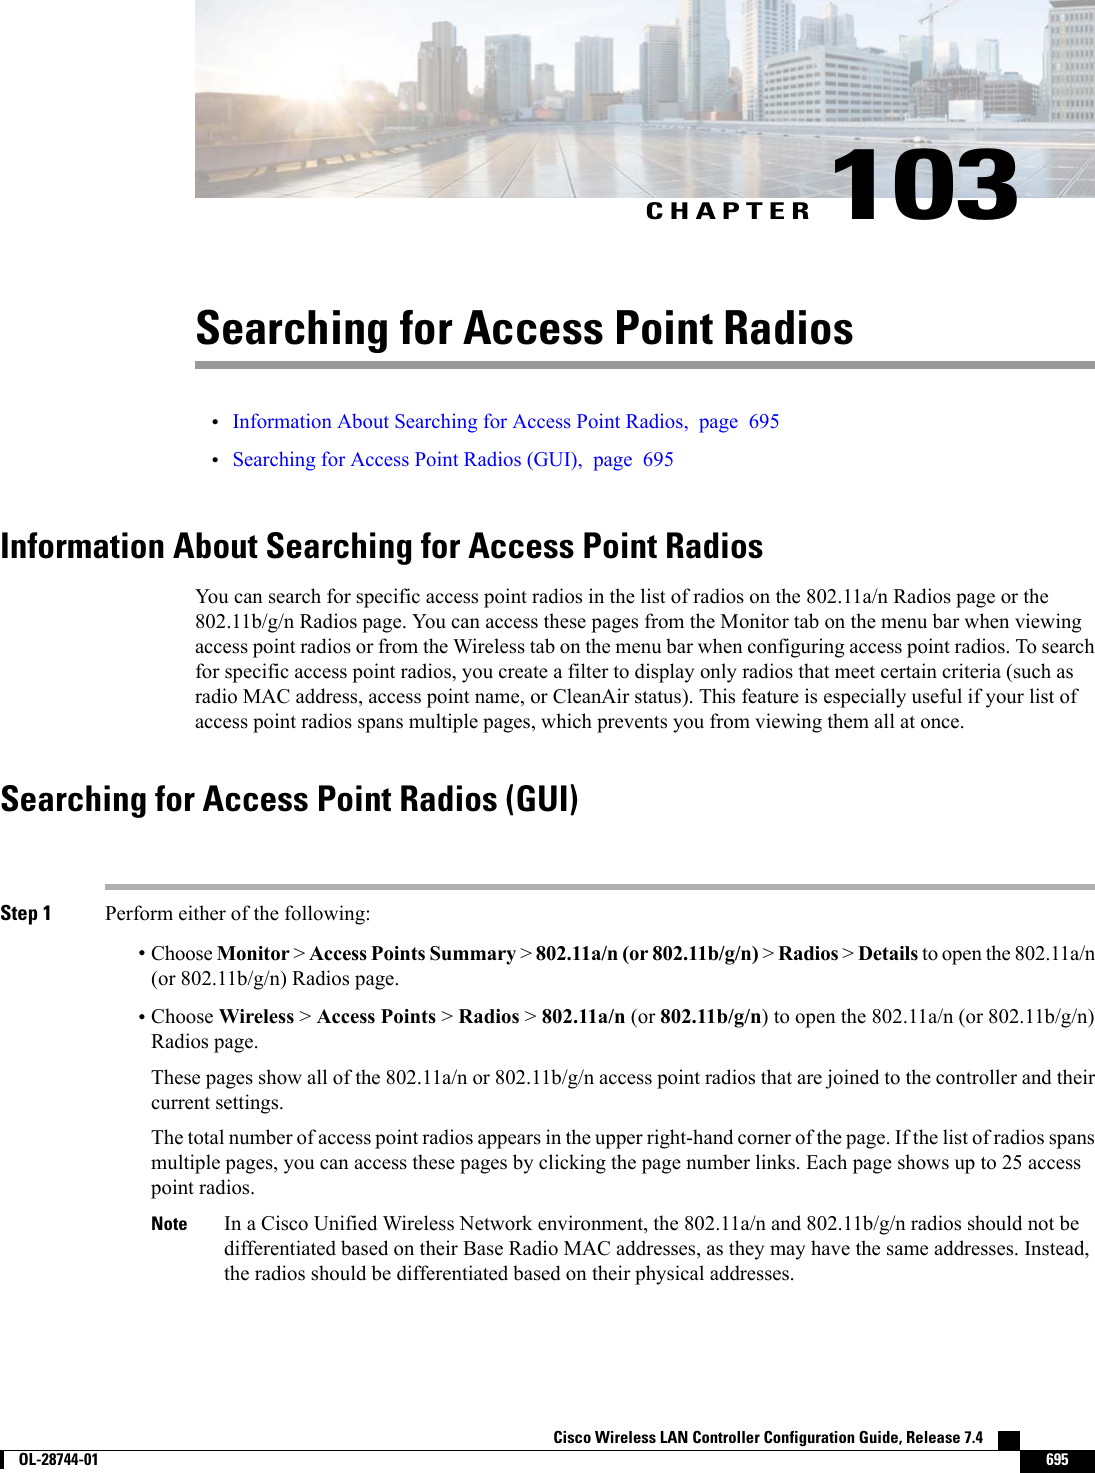 CHAPTER 103Searching for Access Point Radios•Information About Searching for Access Point Radios, page 695•Searching for Access Point Radios (GUI), page 695Information About Searching for Access Point RadiosYou can search for specific access point radios in the list of radios on the 802.11a/n Radios page or the802.11b/g/n Radios page. You can access these pages from the Monitor tab on the menu bar when viewingaccess point radios or from the Wireless tab on the menu bar when configuring access point radios. To searchfor specific access point radios, you create a filter to display only radios that meet certain criteria (such asradio MAC address, access point name, or CleanAir status). This feature is especially useful if your list ofaccess point radios spans multiple pages, which prevents you from viewing them all at once.Searching for Access Point Radios (GUI)Step 1 Perform either of the following:•Choose Monitor &gt;Access Points Summary &gt;802.11a/n (or 802.11b/g/n) &gt;Radios &gt;Details to open the 802.11a/n(or 802.11b/g/n) Radios page.•Choose Wireless &gt;Access Points &gt;Radios &gt;802.11a/n (or 802.11b/g/n) to open the 802.11a/n (or 802.11b/g/n)Radios page.These pages show all of the 802.11a/n or 802.11b/g/n access point radios that are joined to the controller and theircurrent settings.The total number of access point radios appears in the upper right-hand corner of the page. If the list of radios spansmultiple pages, you can access these pages by clicking the page number links. Each page shows up to 25 accesspoint radios.In a Cisco Unified Wireless Network environment, the 802.11a/n and 802.11b/g/n radios should not bedifferentiated based on their Base Radio MAC addresses, as they may have the same addresses. Instead,the radios should be differentiated based on their physical addresses.NoteCisco Wireless LAN Controller Configuration Guide, Release 7.4        OL-28744-01 695